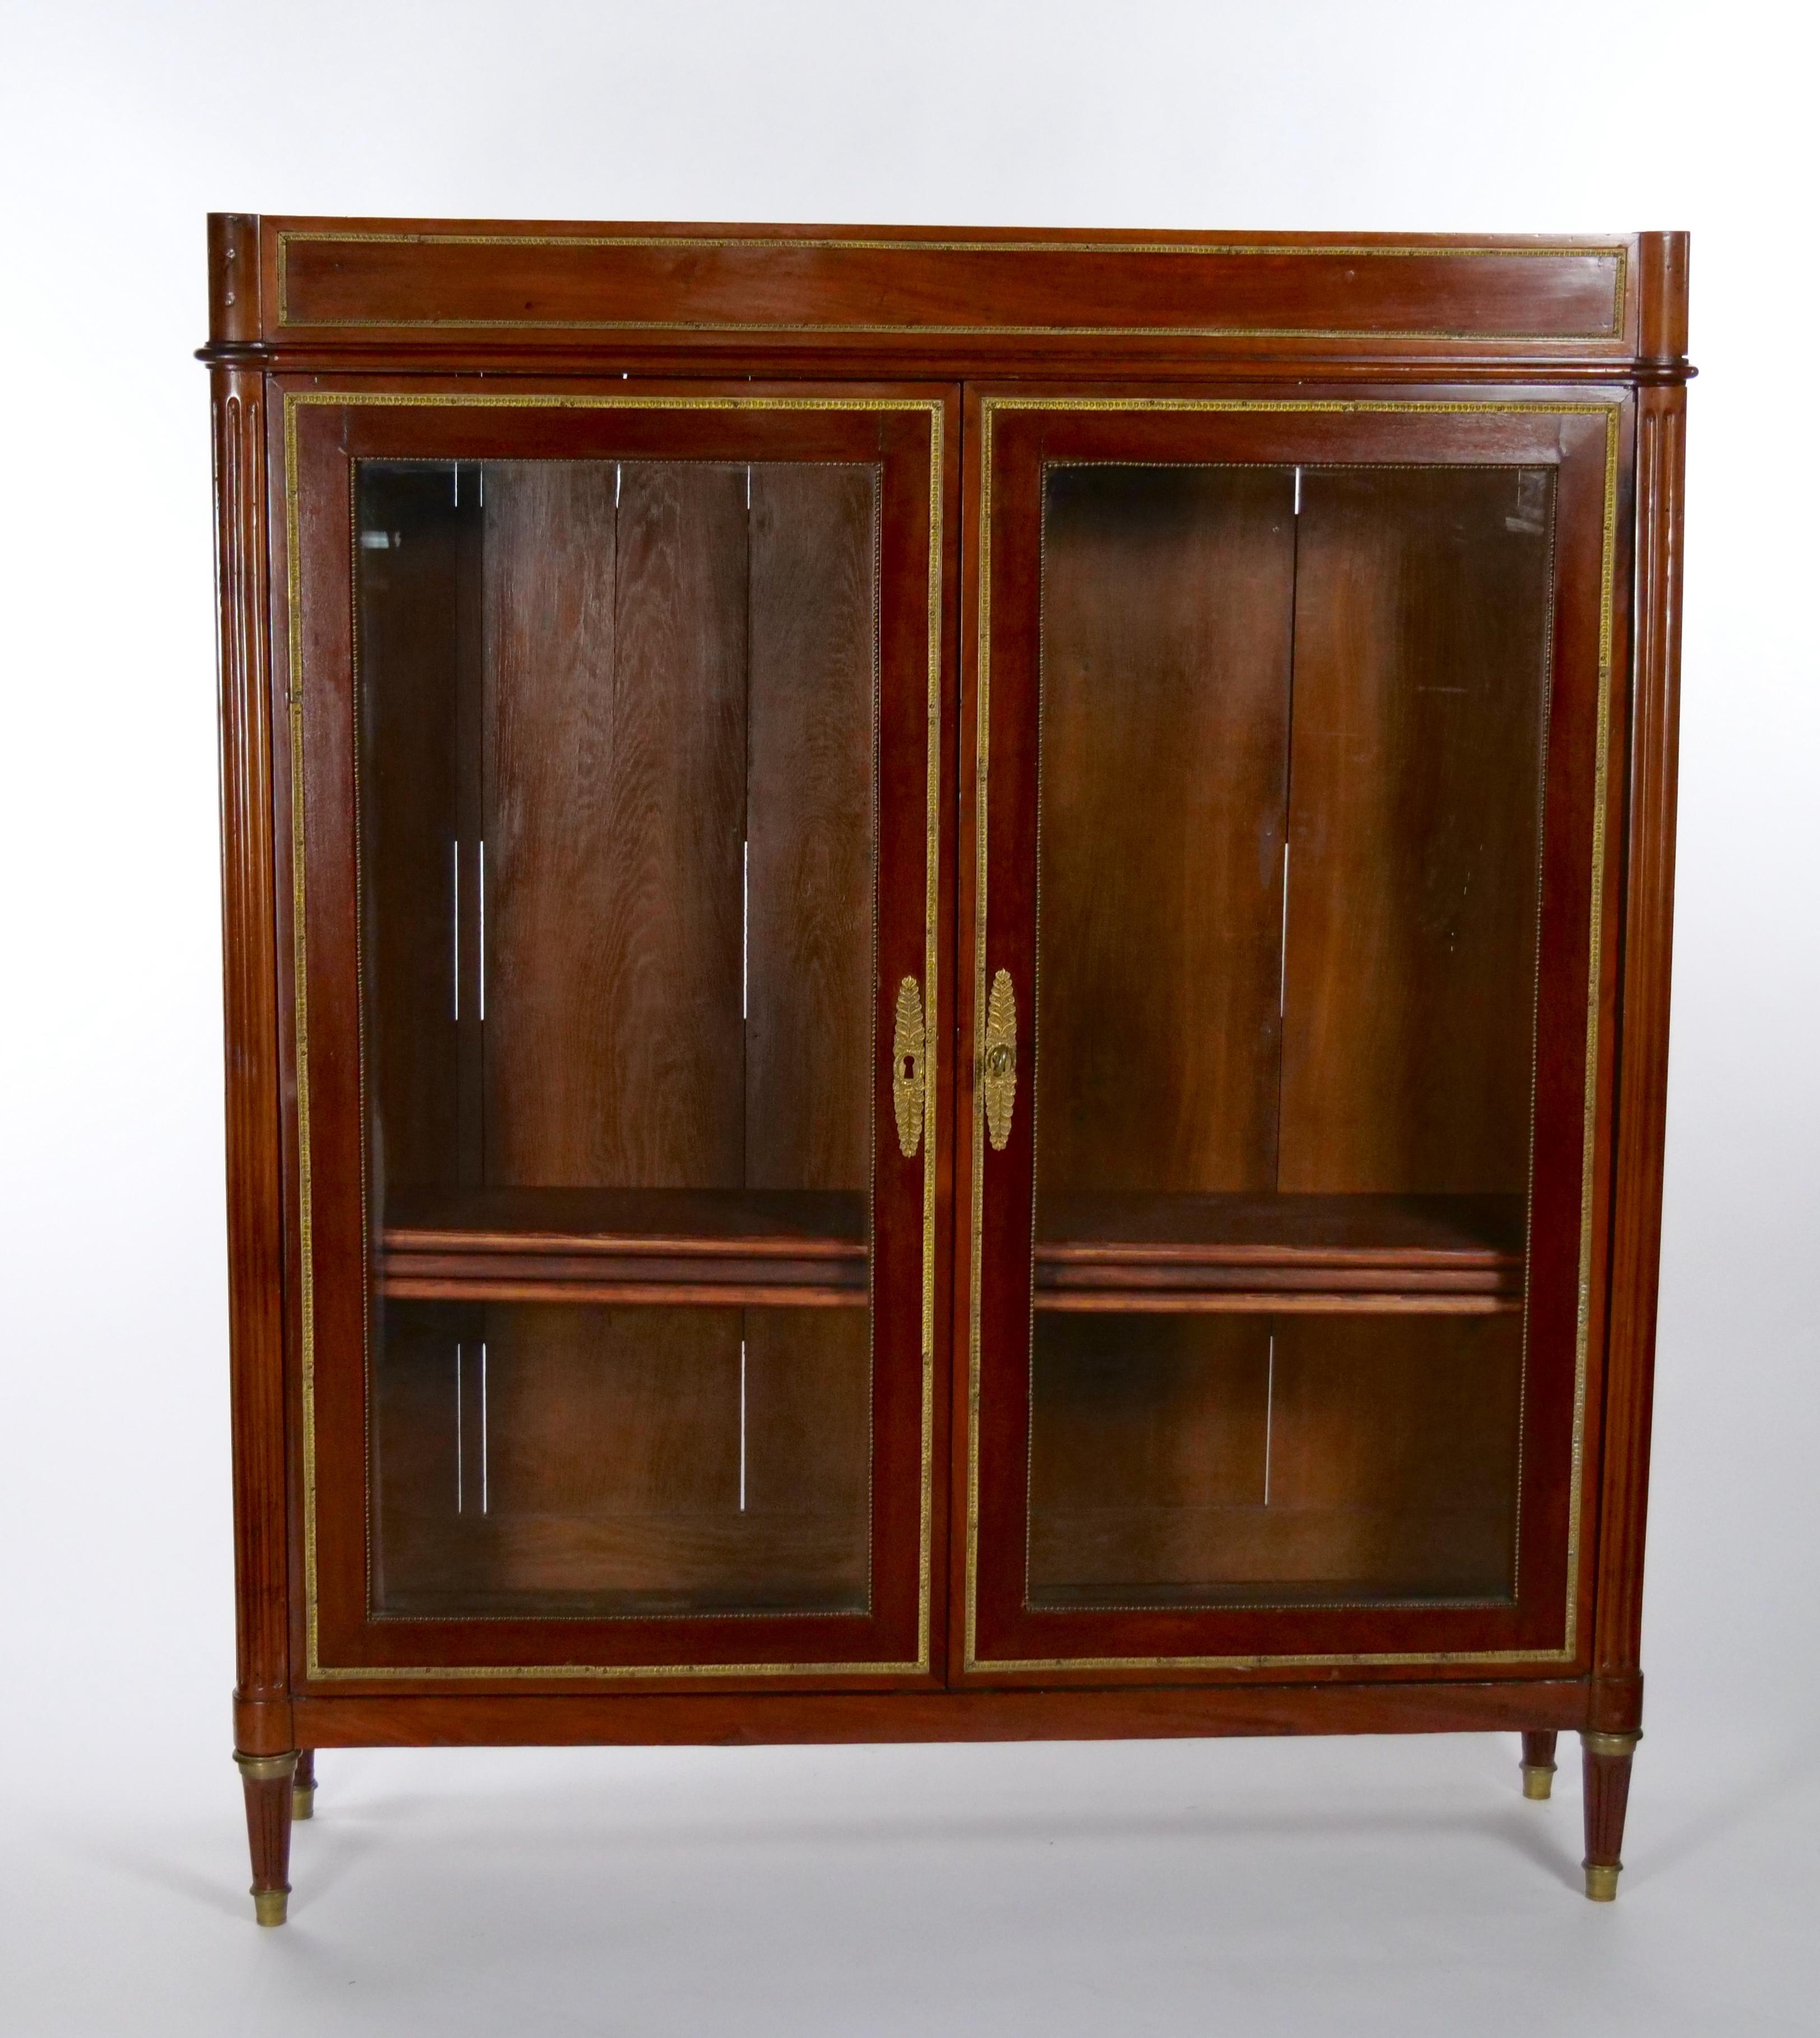 Early 19th century French Louis XVI style Mahogany with brass mounted marble top vitrine / bookcase. This was designed to display your most prized possessions or one of a kind collection with incredible style. Beautifully Crafted from exotic